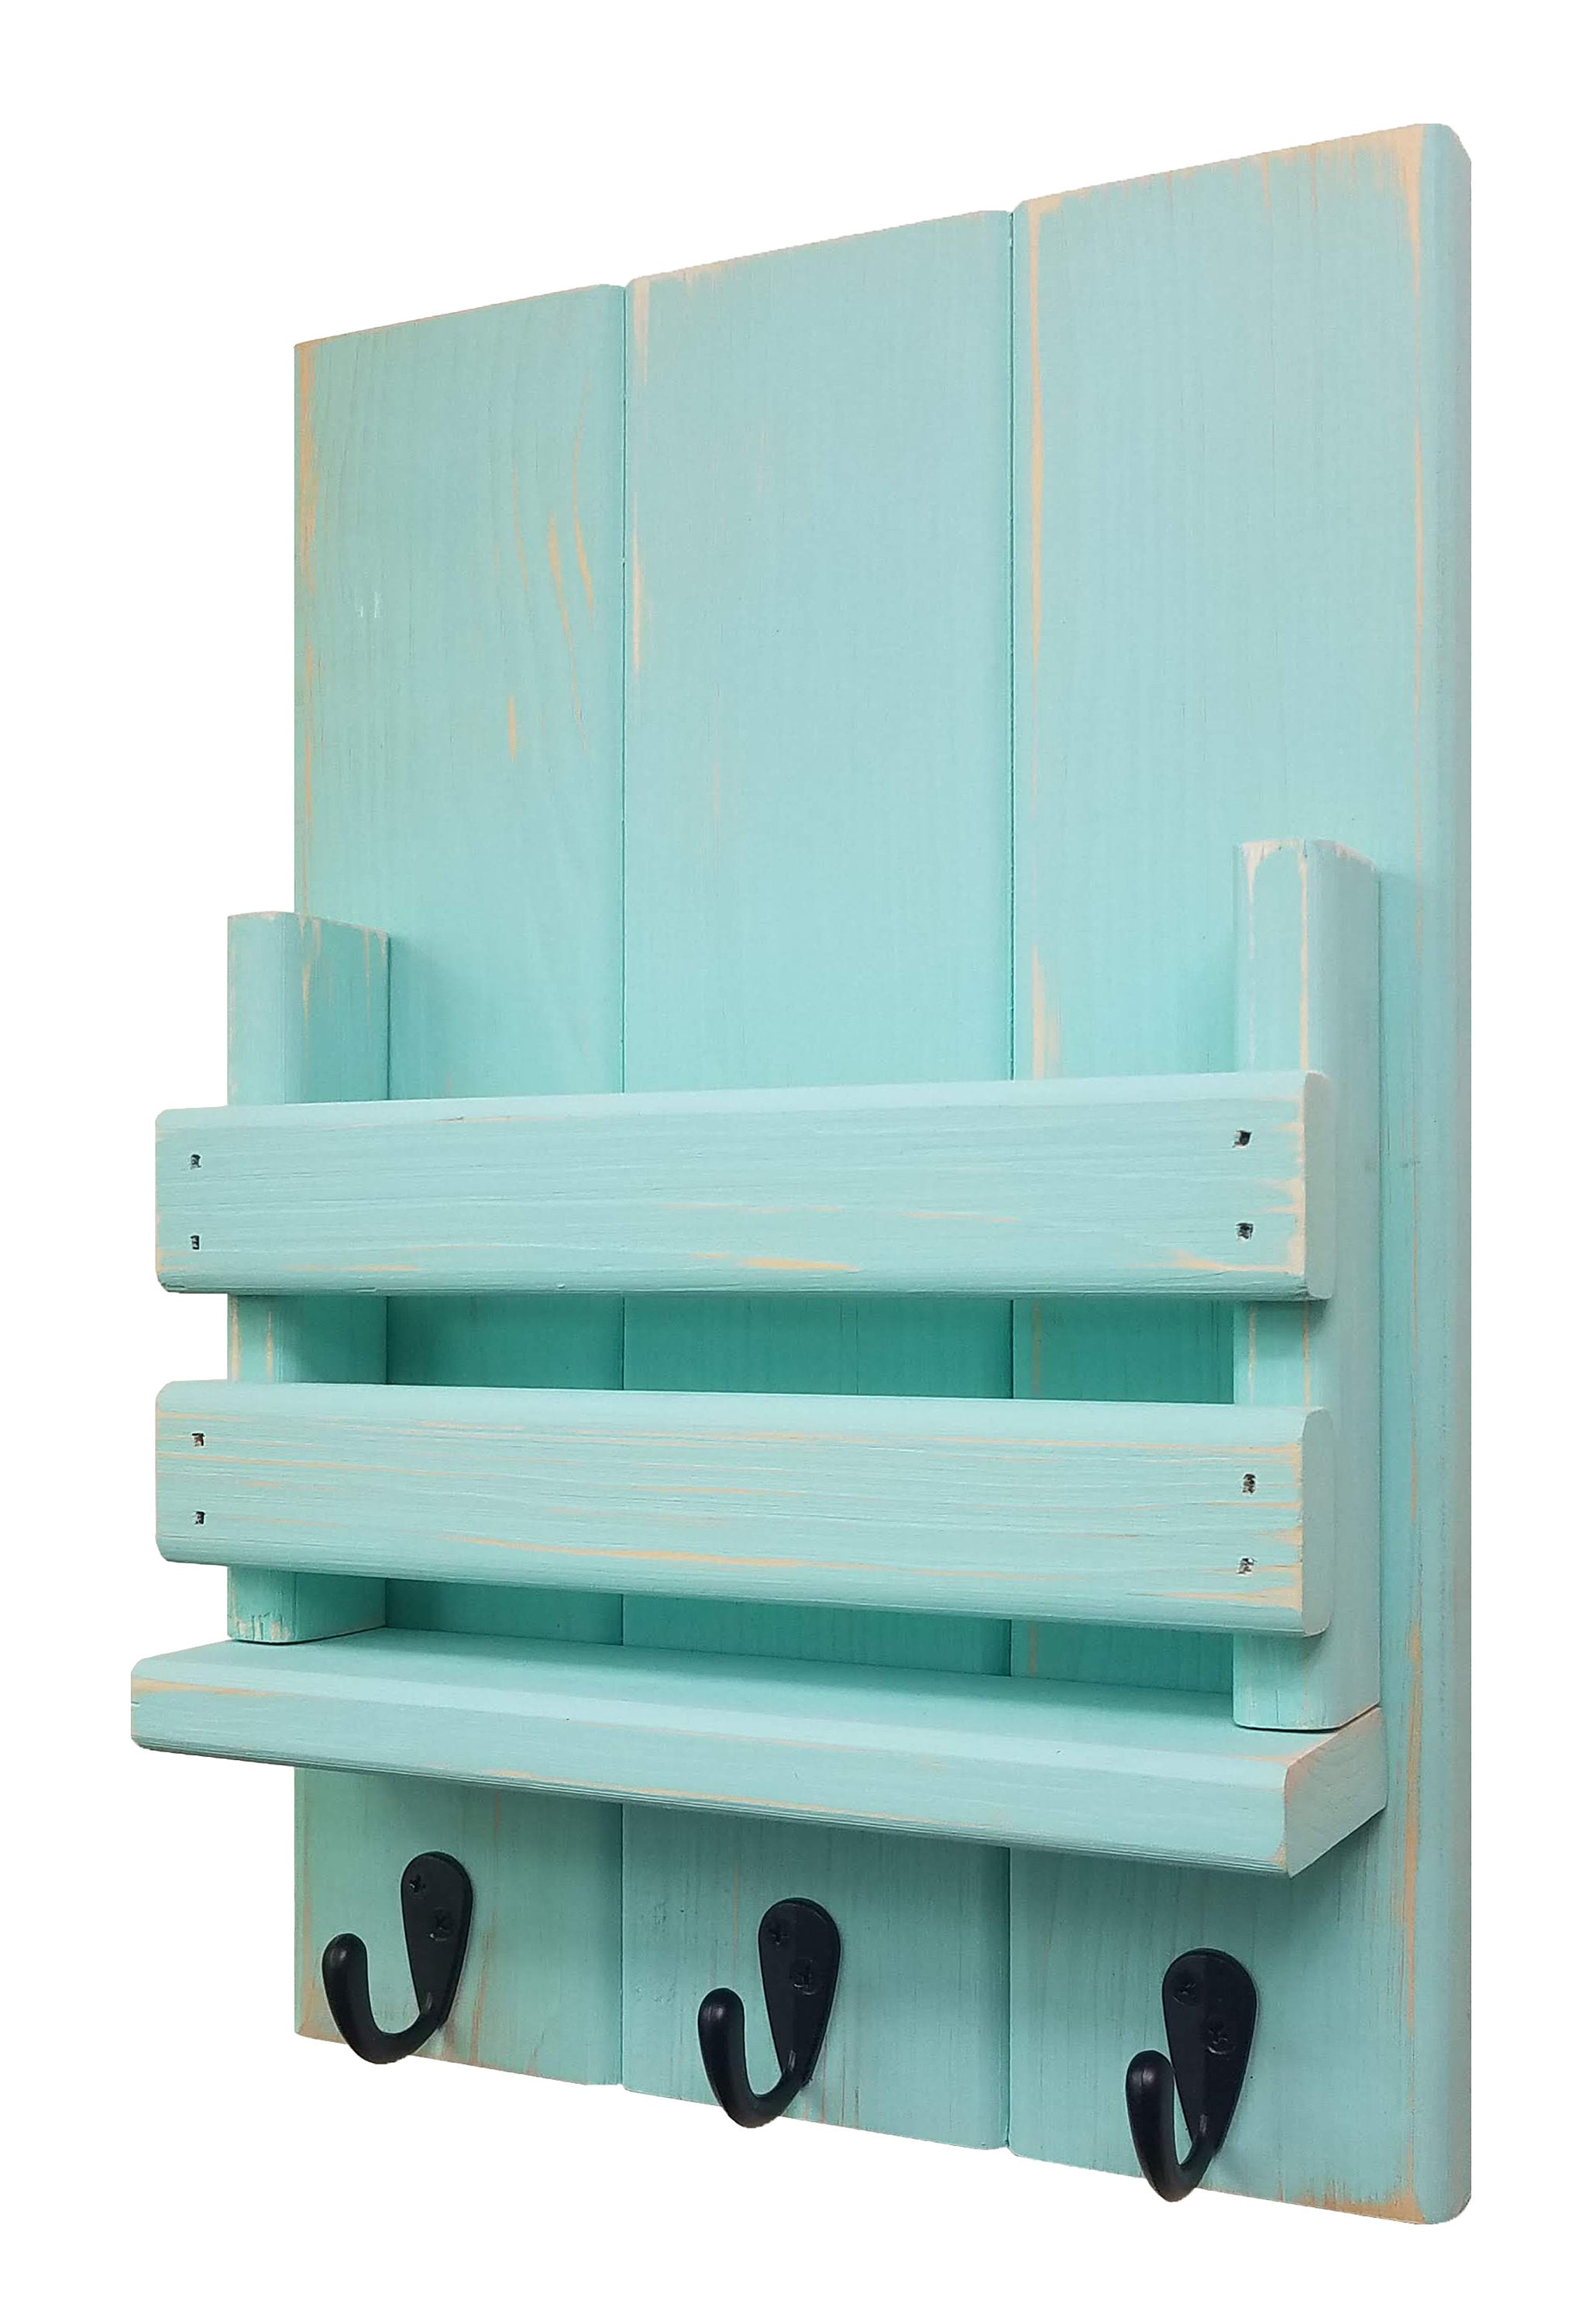 Sydney Slat Front, Mail Holder Organizer and Key Holder, Available with up to 3 Single Key Hooks – 20 Custom Colors: Shown in Sea Blue - Renewed Decor & Storage